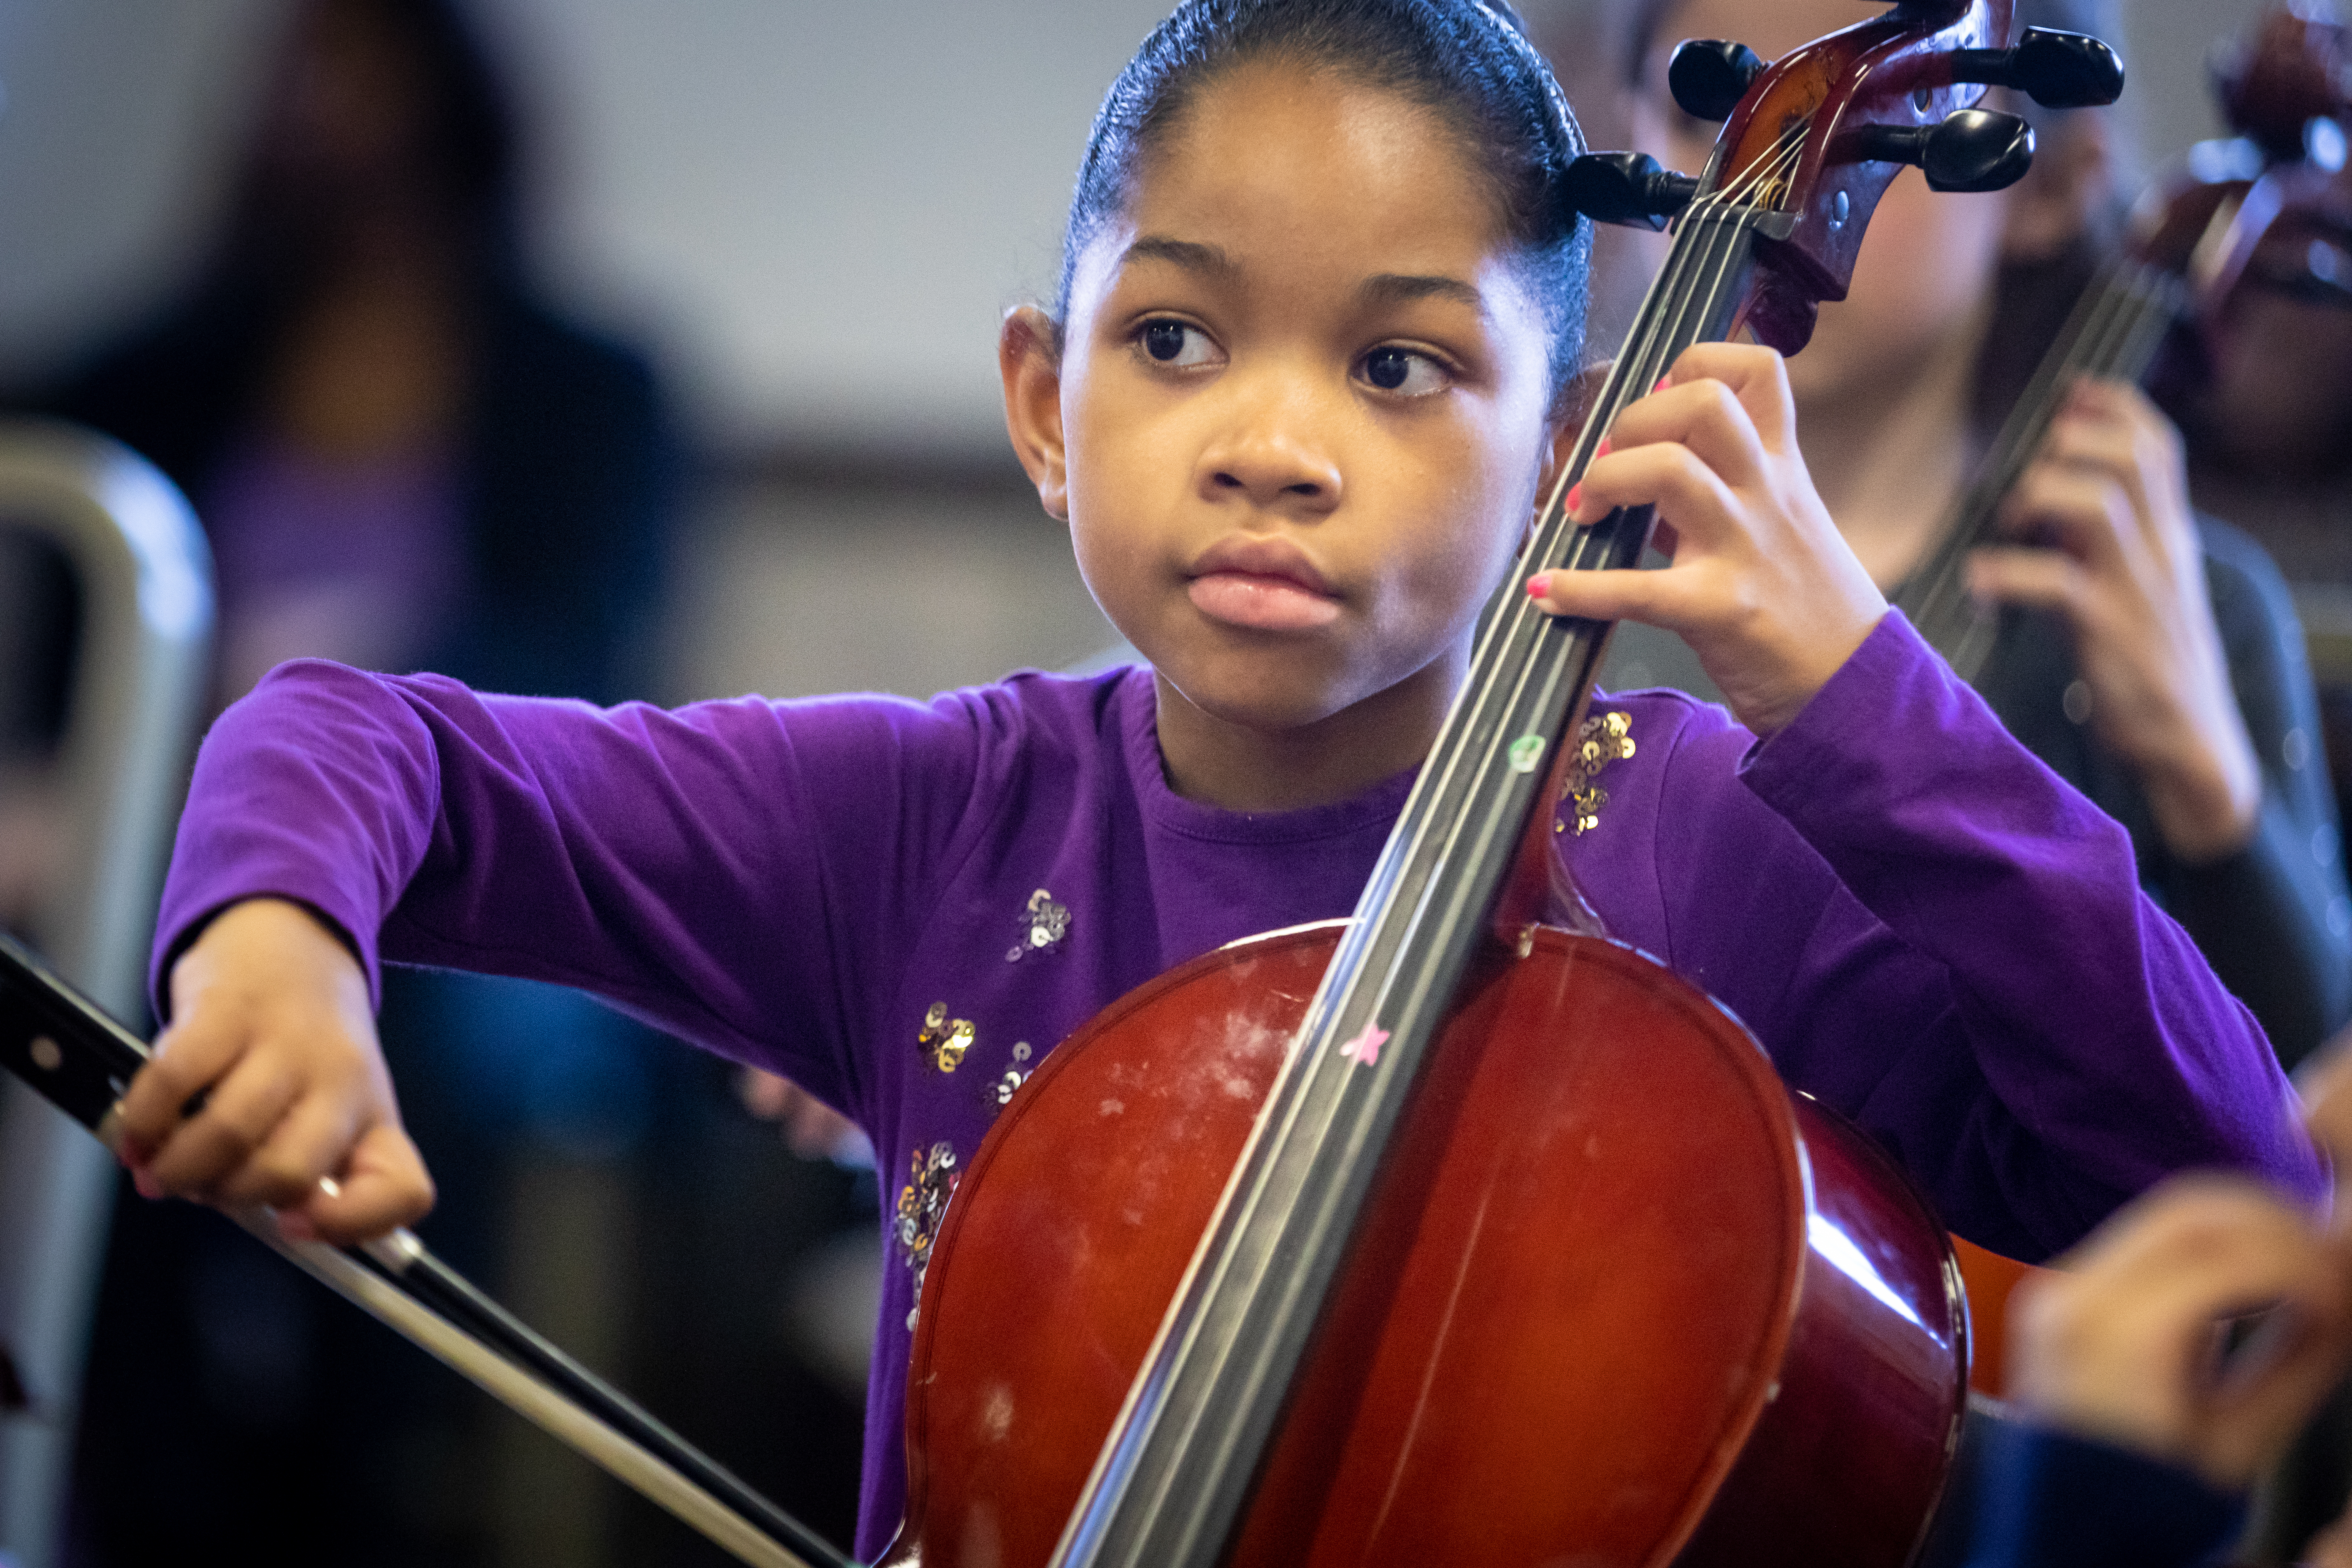 Girl wearing purple sweater playing a cello